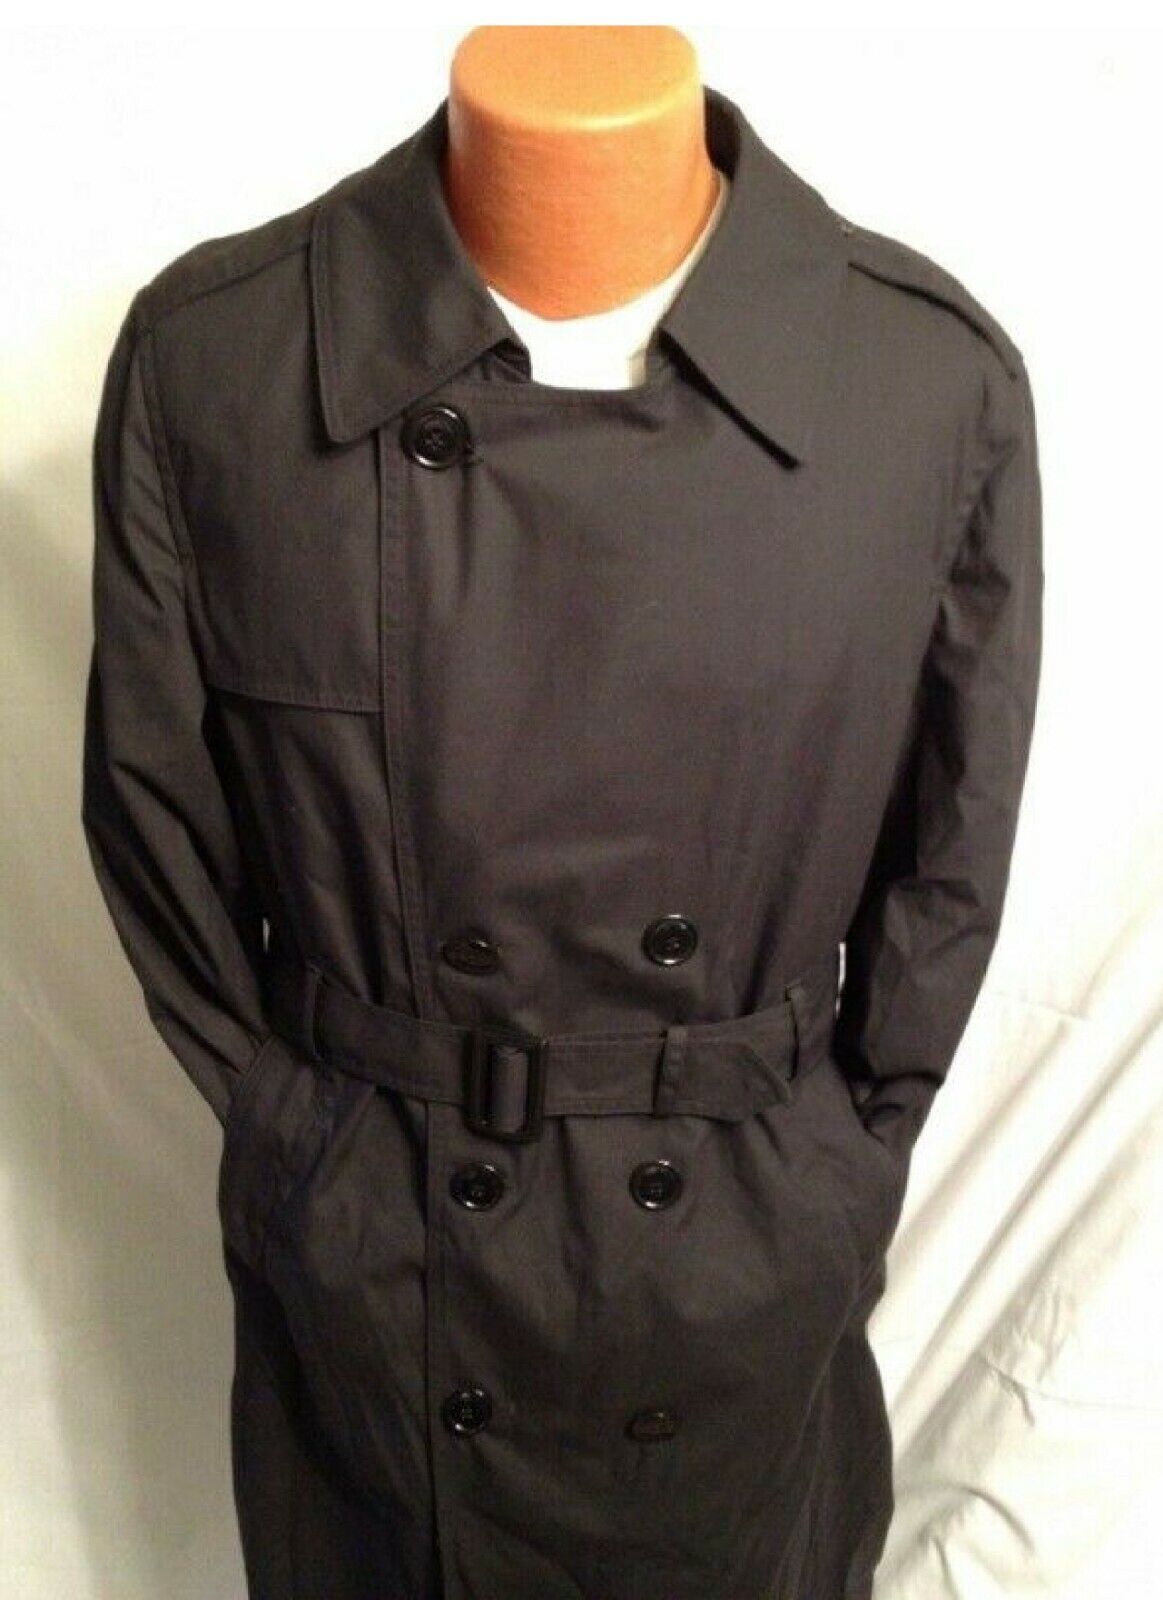 US ARMY MILITARY ISSUE COAT ALL WEATHER BLACK TRENCH MEN'S 42S JACKET OVERCOAT